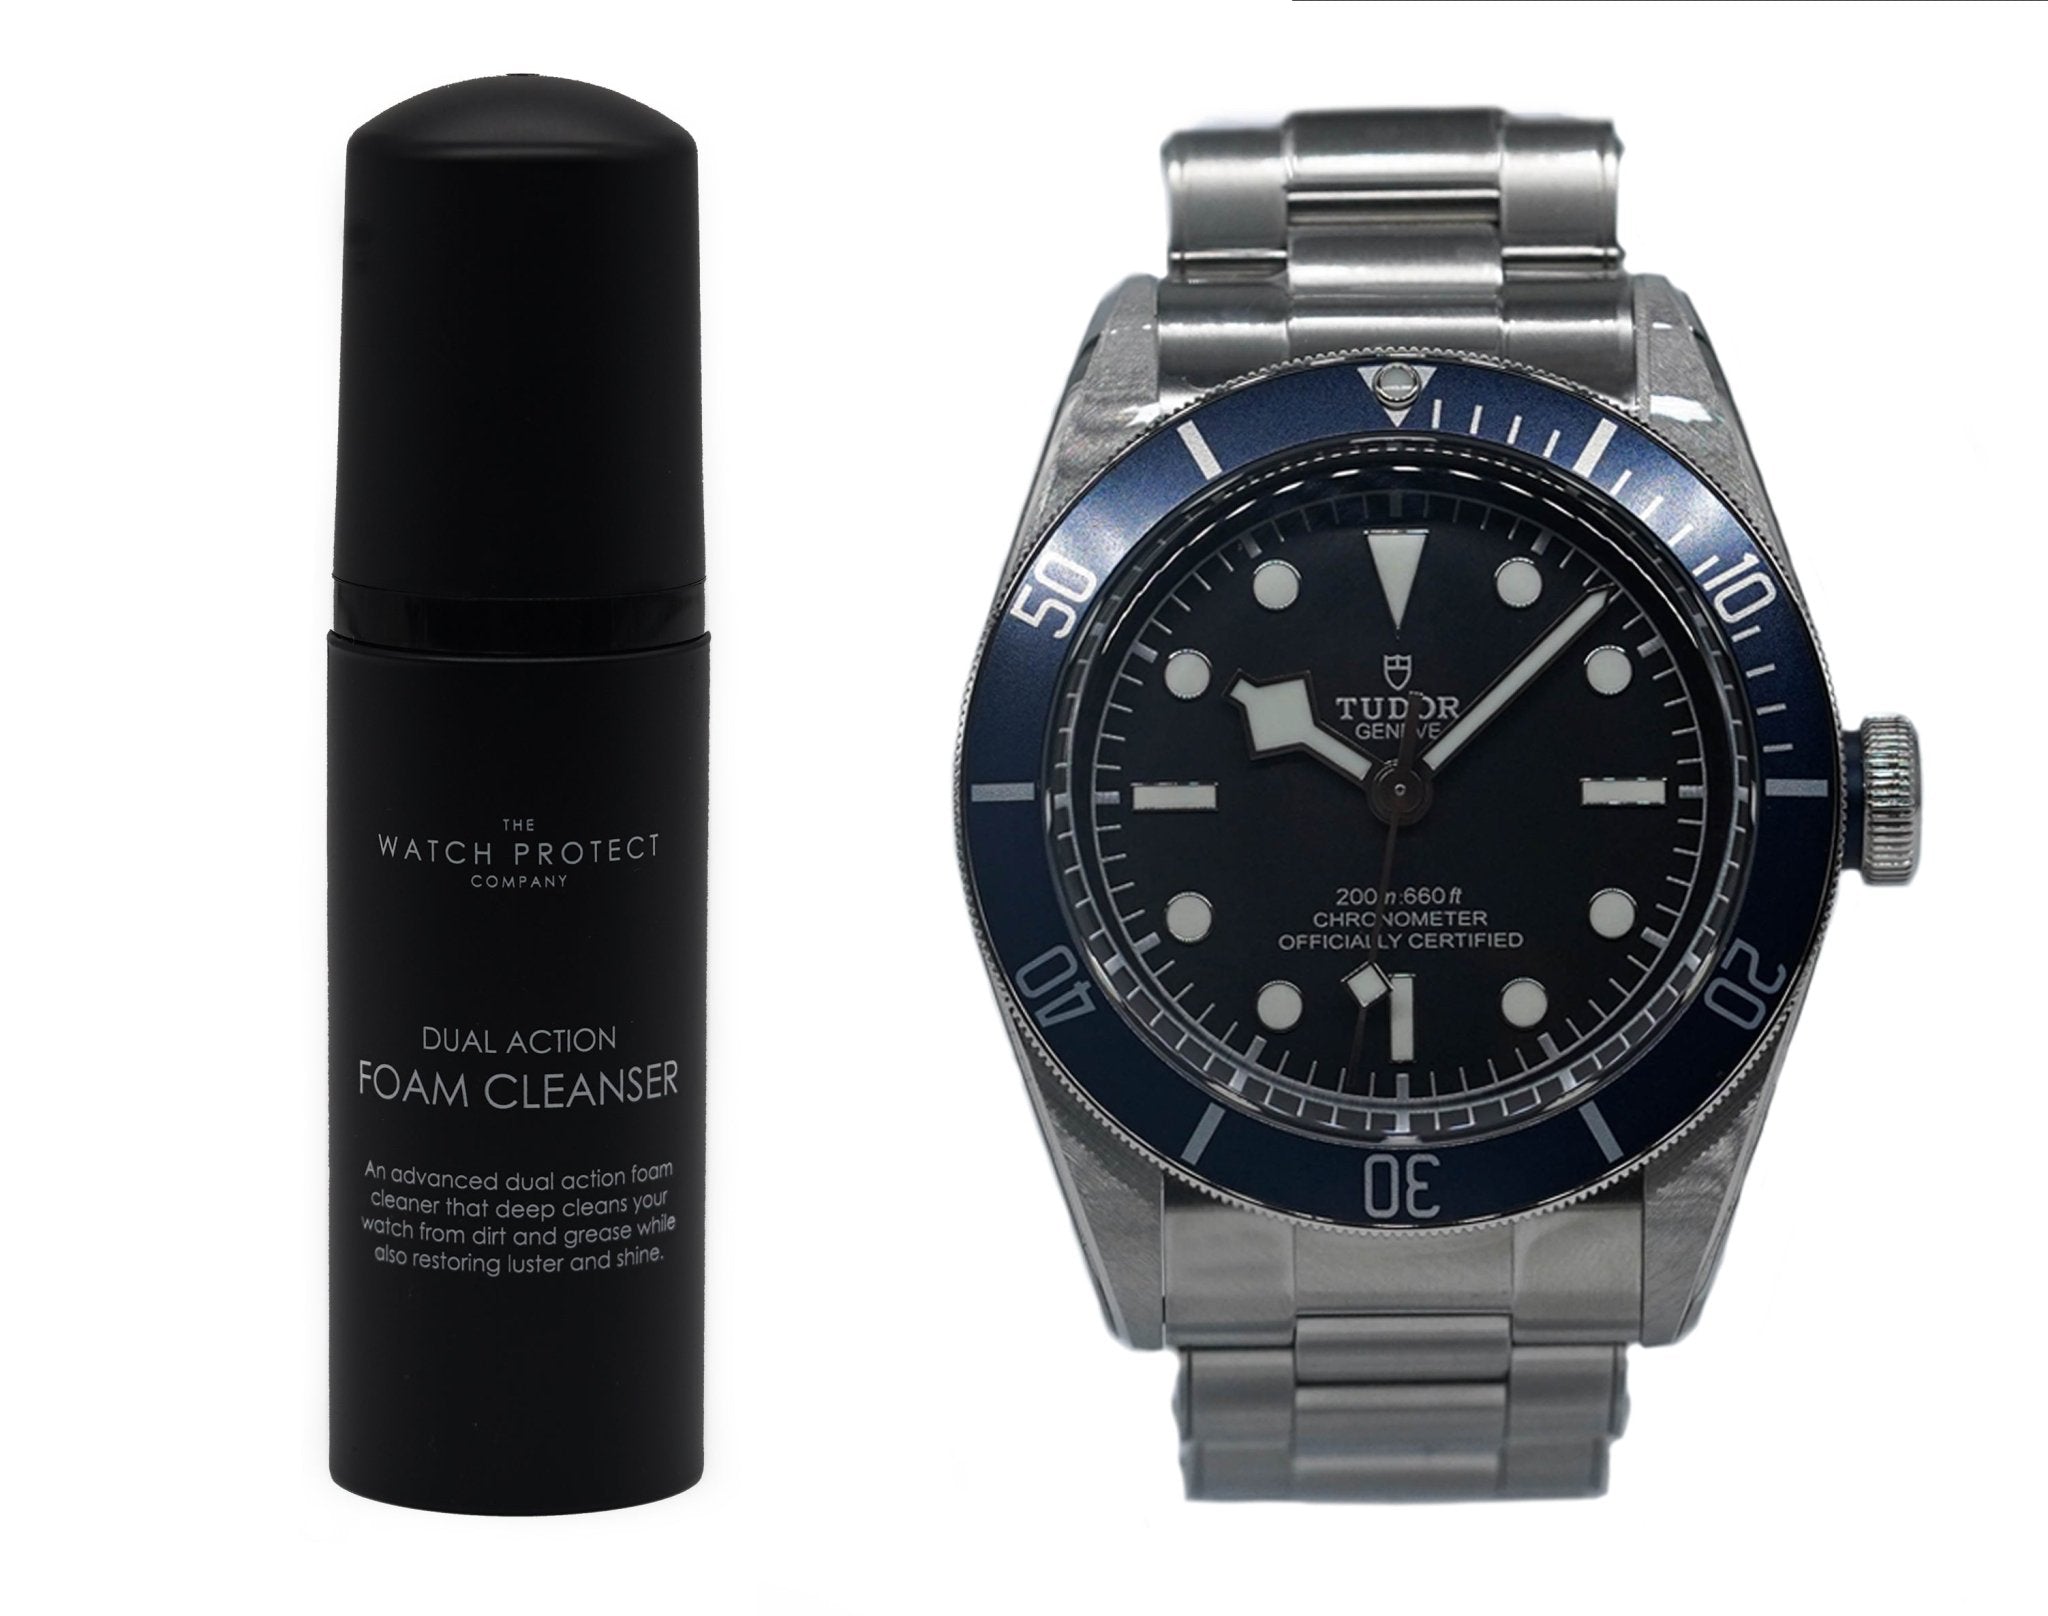 DUAL ACTION FOAM CLEANER & TUDOR BLACK BAY HERITAGE 41 - TIER 3 - WATCH PROTECTION KIT BUNDLE - The Watch Protect Company